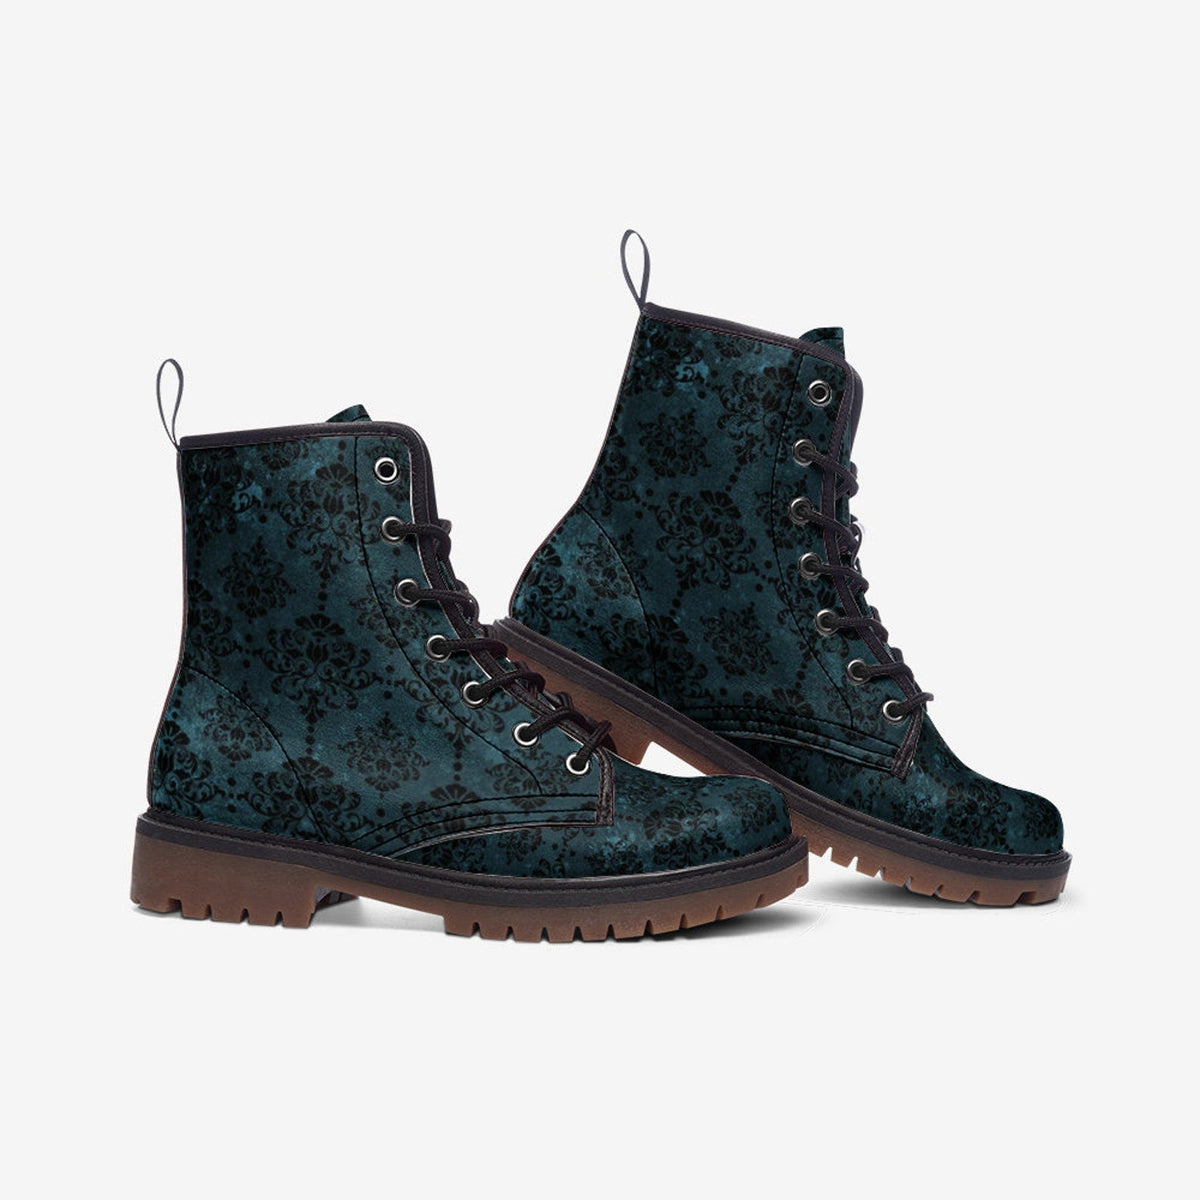 Emerald Blossoms - Boho Witchy Boots, Dark Romantic Boots